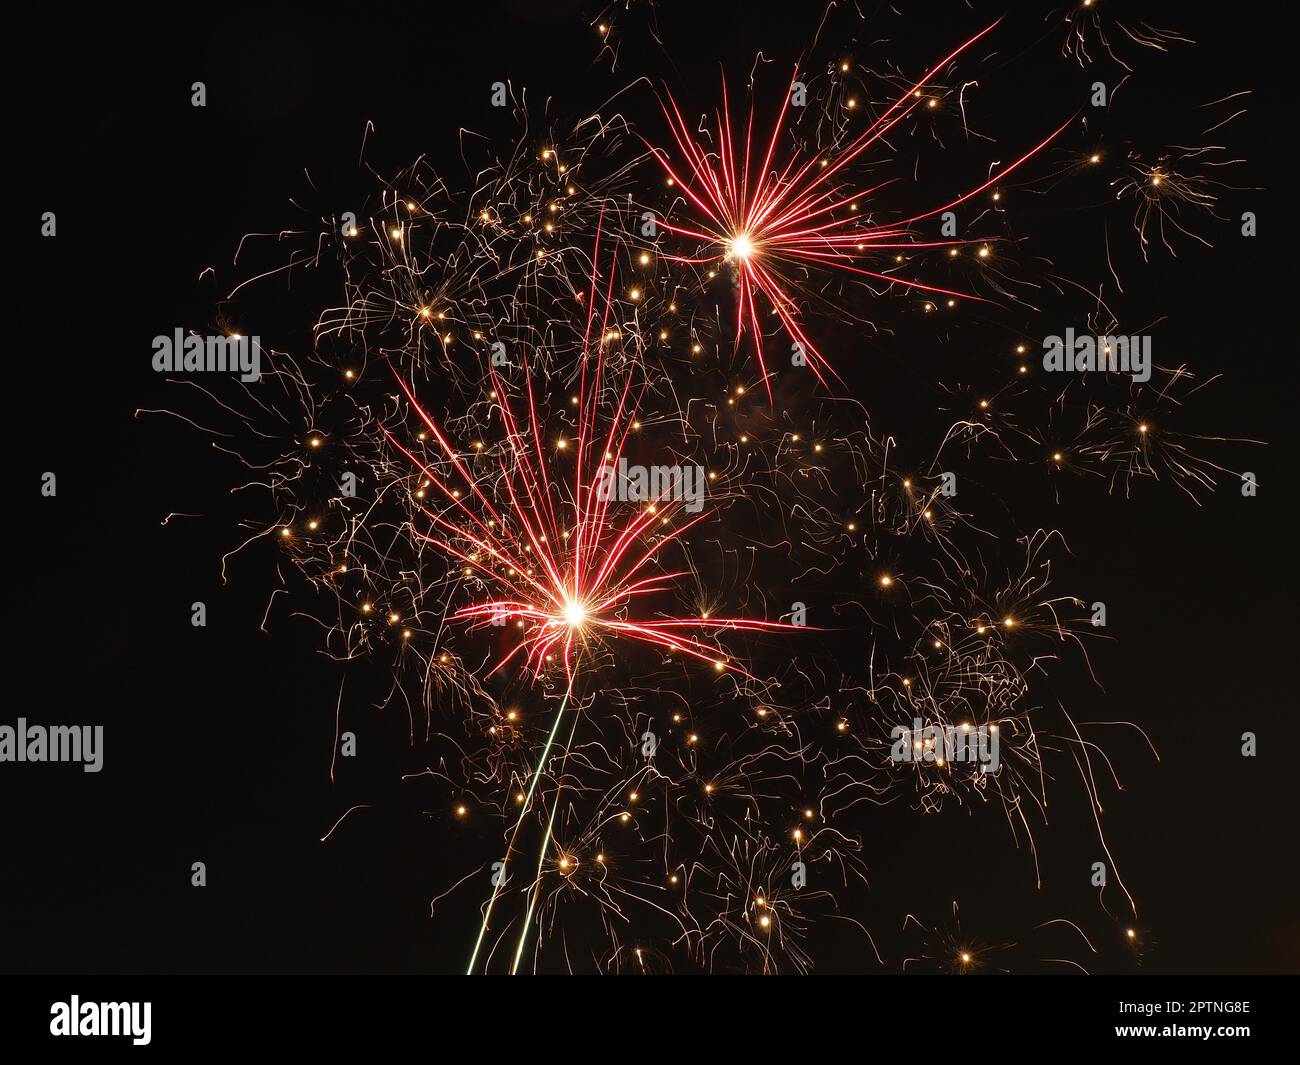 fireworks in the night sky. Colorful flashes of fire on black background. Celebration, festival or victory symbol. Explosions of fire and sparks in th Stock Photo